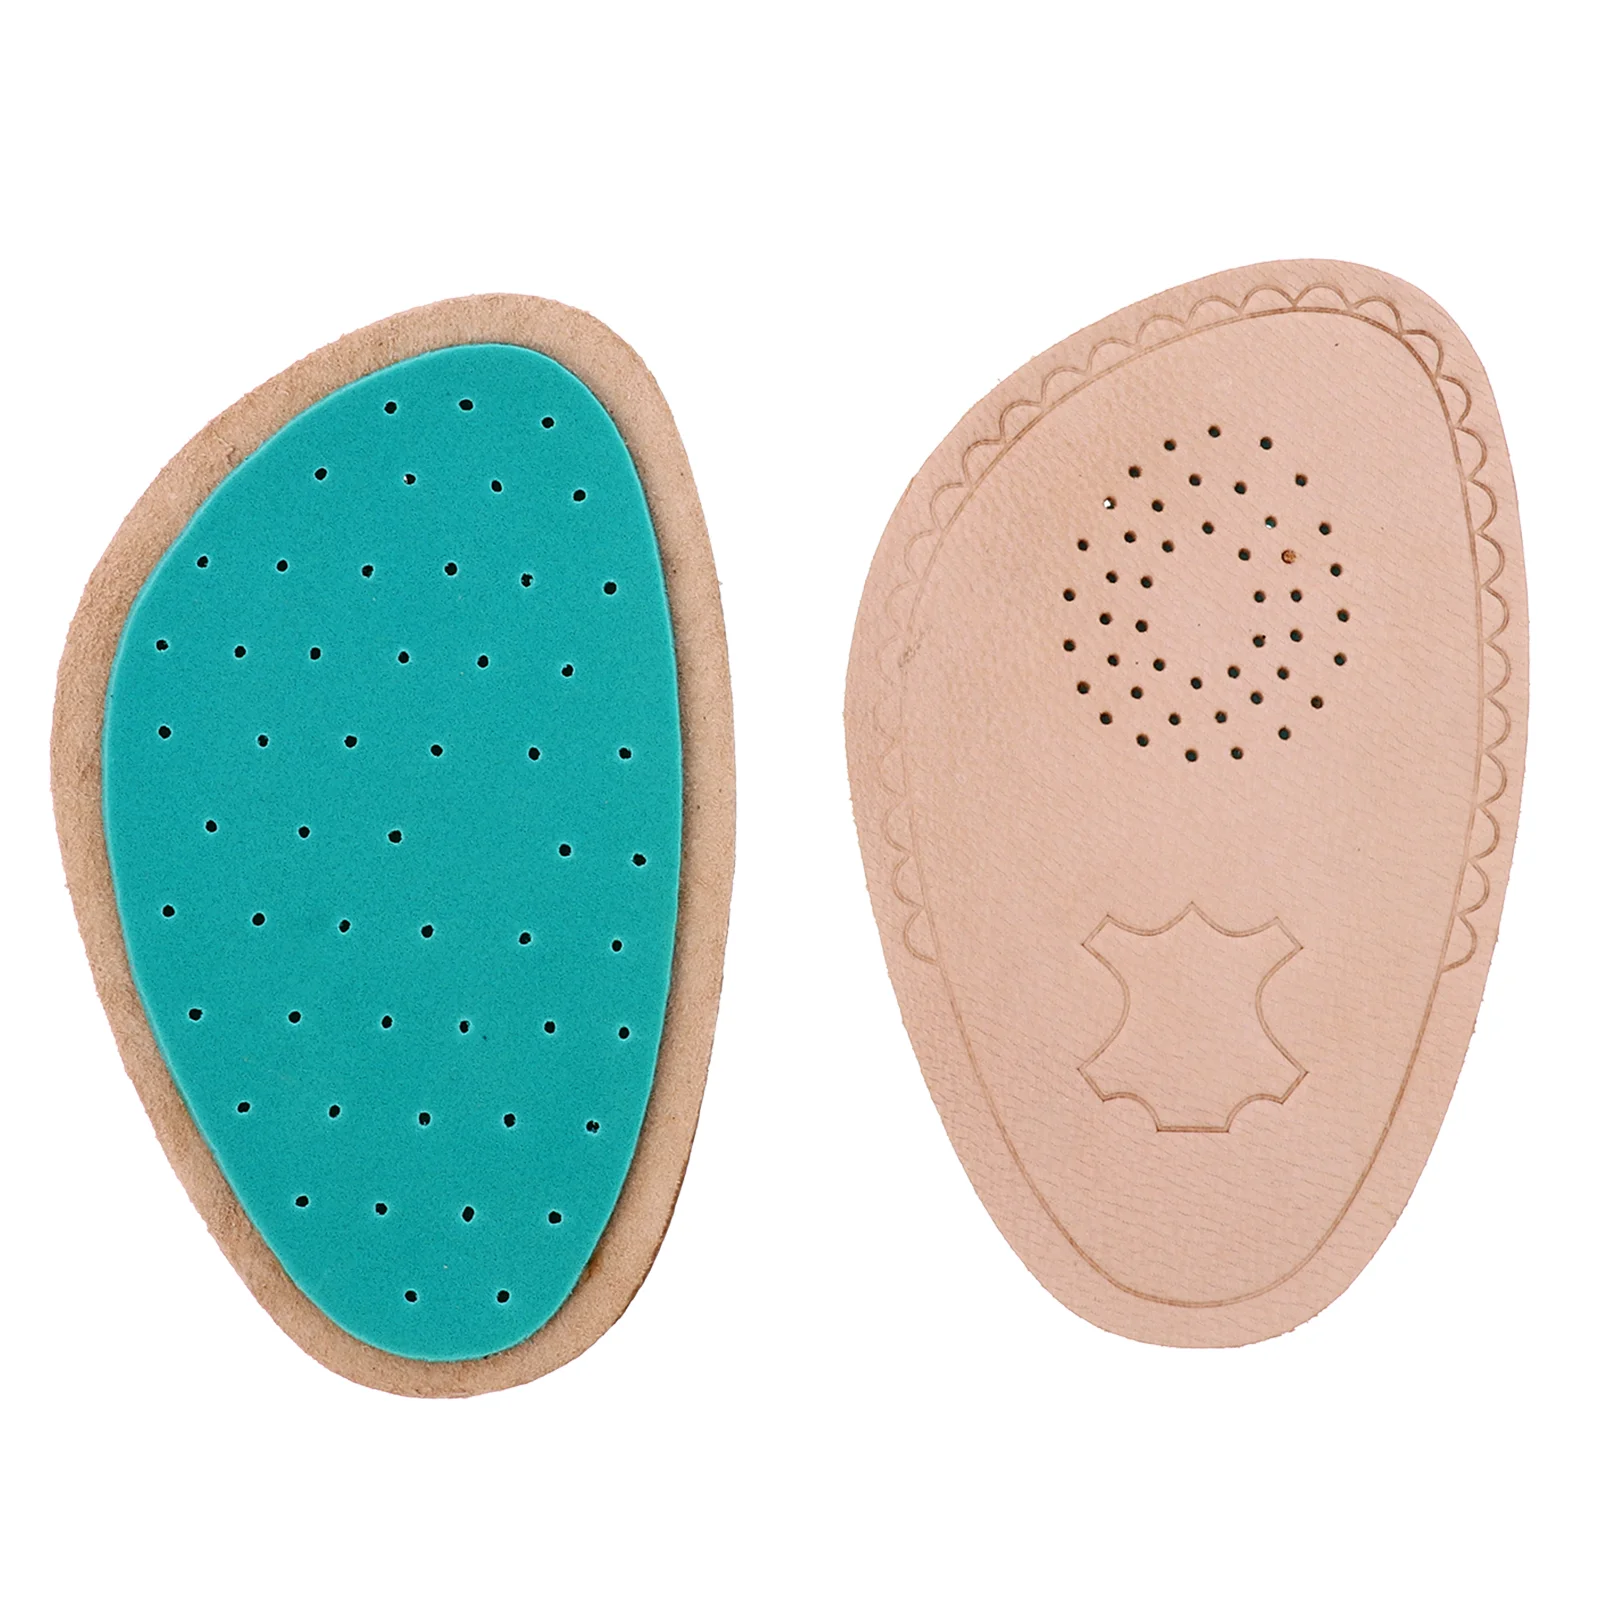 Sole Pad Shoe Inserts Forefoot Cushion Invisible Insoles High Heels Eva Half Women's Anti-slip